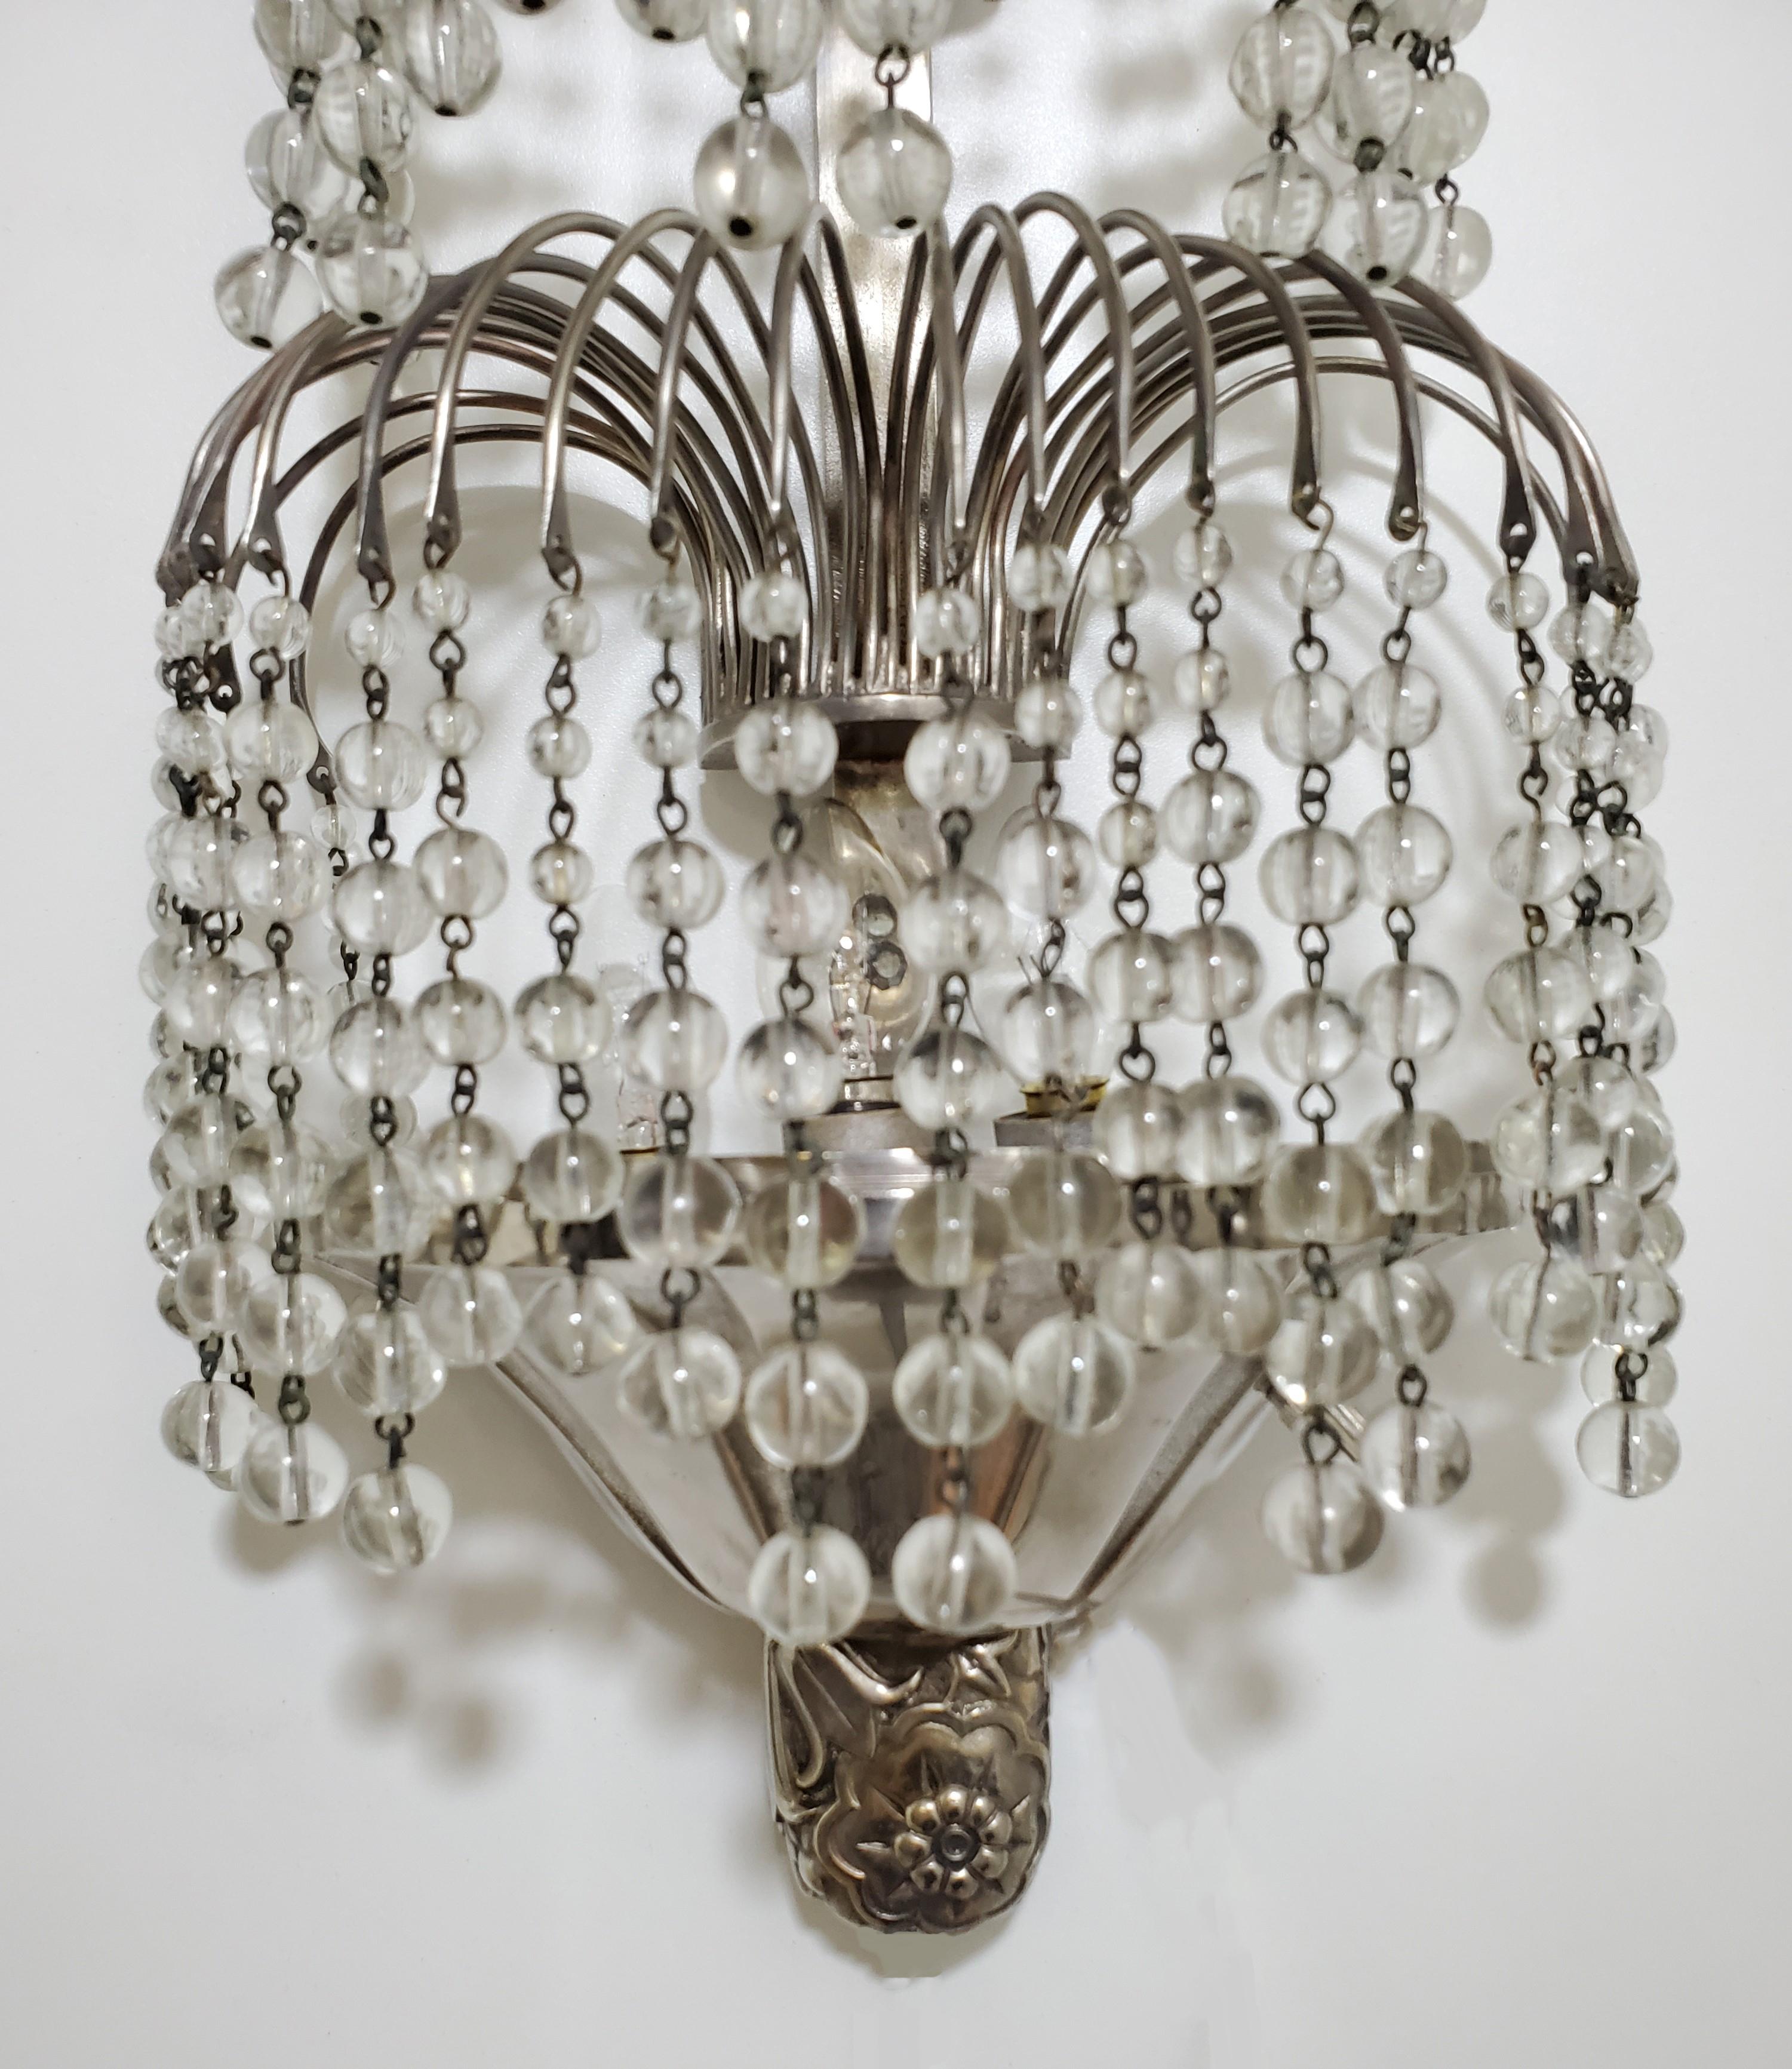 Pair of Tiered Crystal French Art Deco Wall Sconces Attrib to Sue et Mare For Sale 2